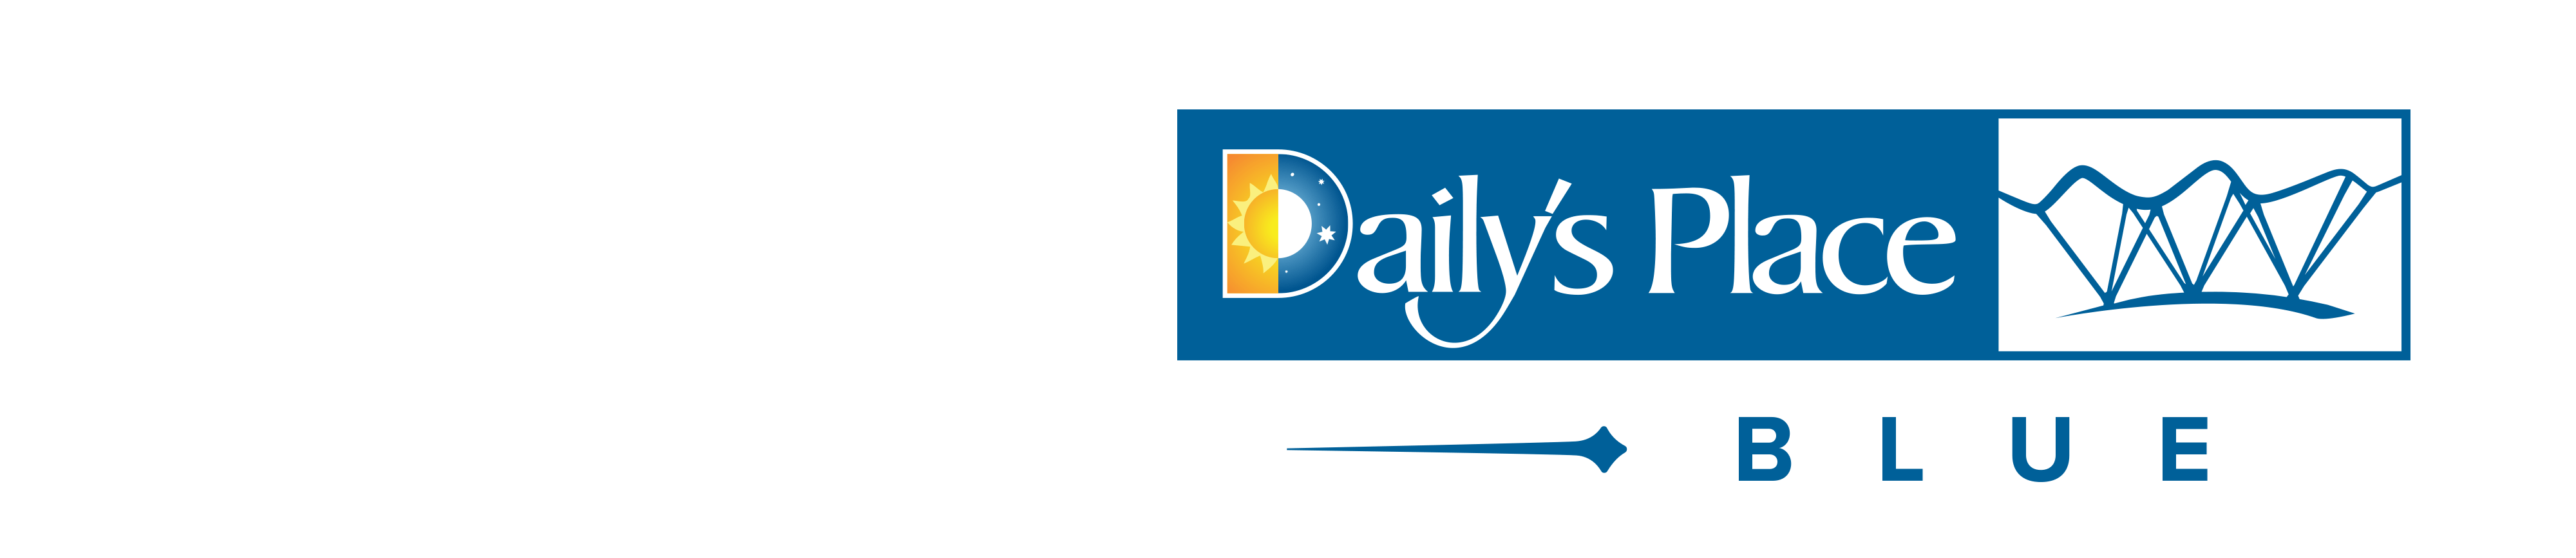 Daily's Logo - Daily's Place Blue. Daily's Place